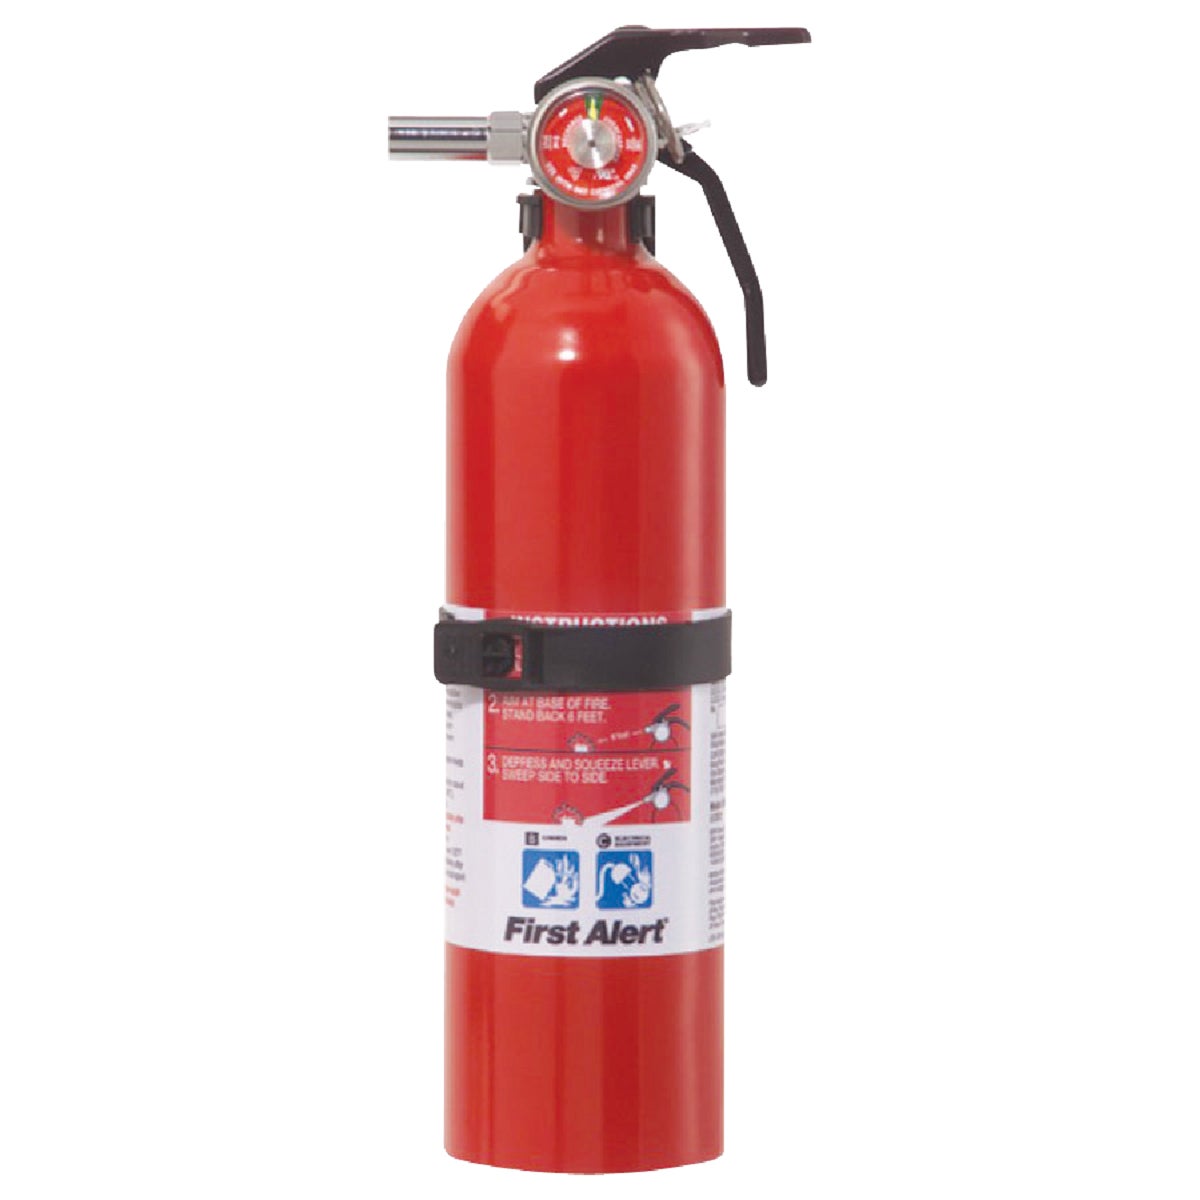 First Alert 5-B:C Rechargeable Recreation Fire Extinguisher